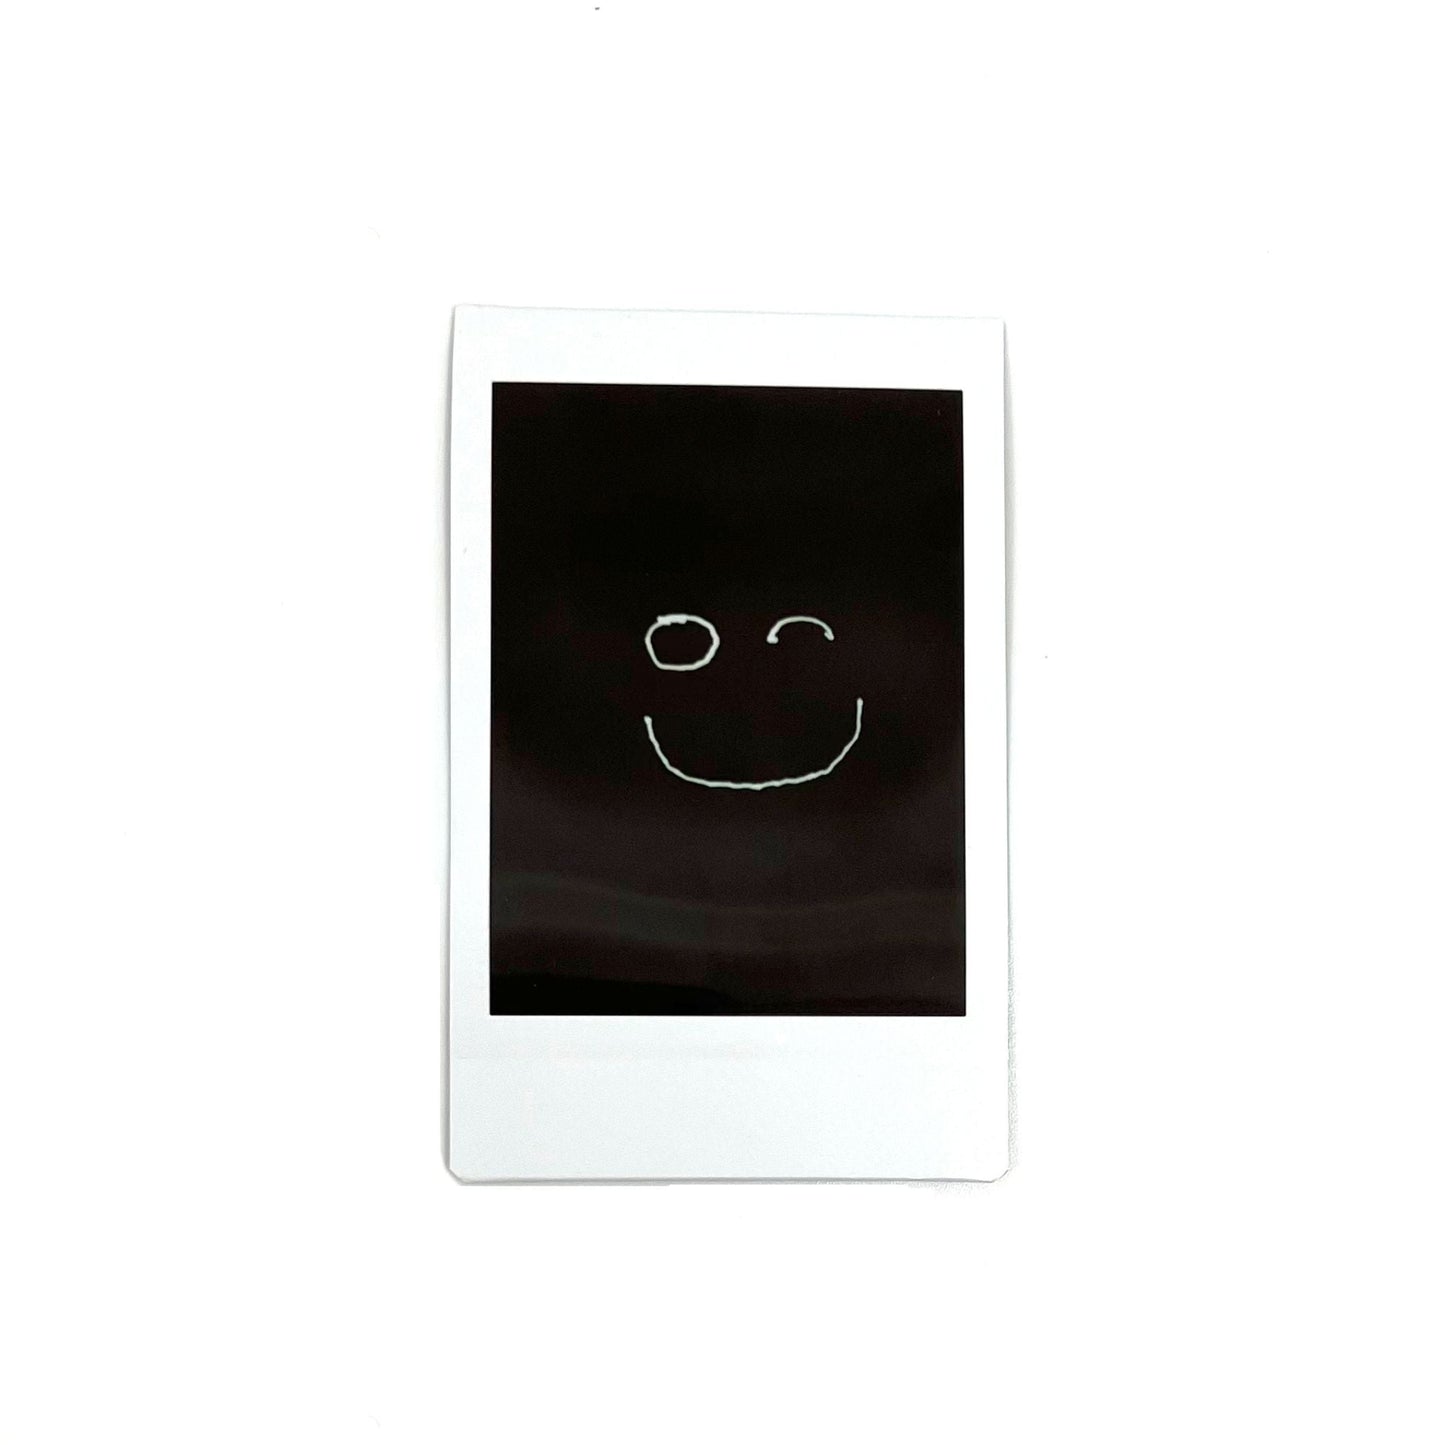 An instant photo captured with a Jollylook Pinhole Mini camera, set against a white background. The photo showcases a smile drawn with light in the darkness, creating a captivating and artistic visual